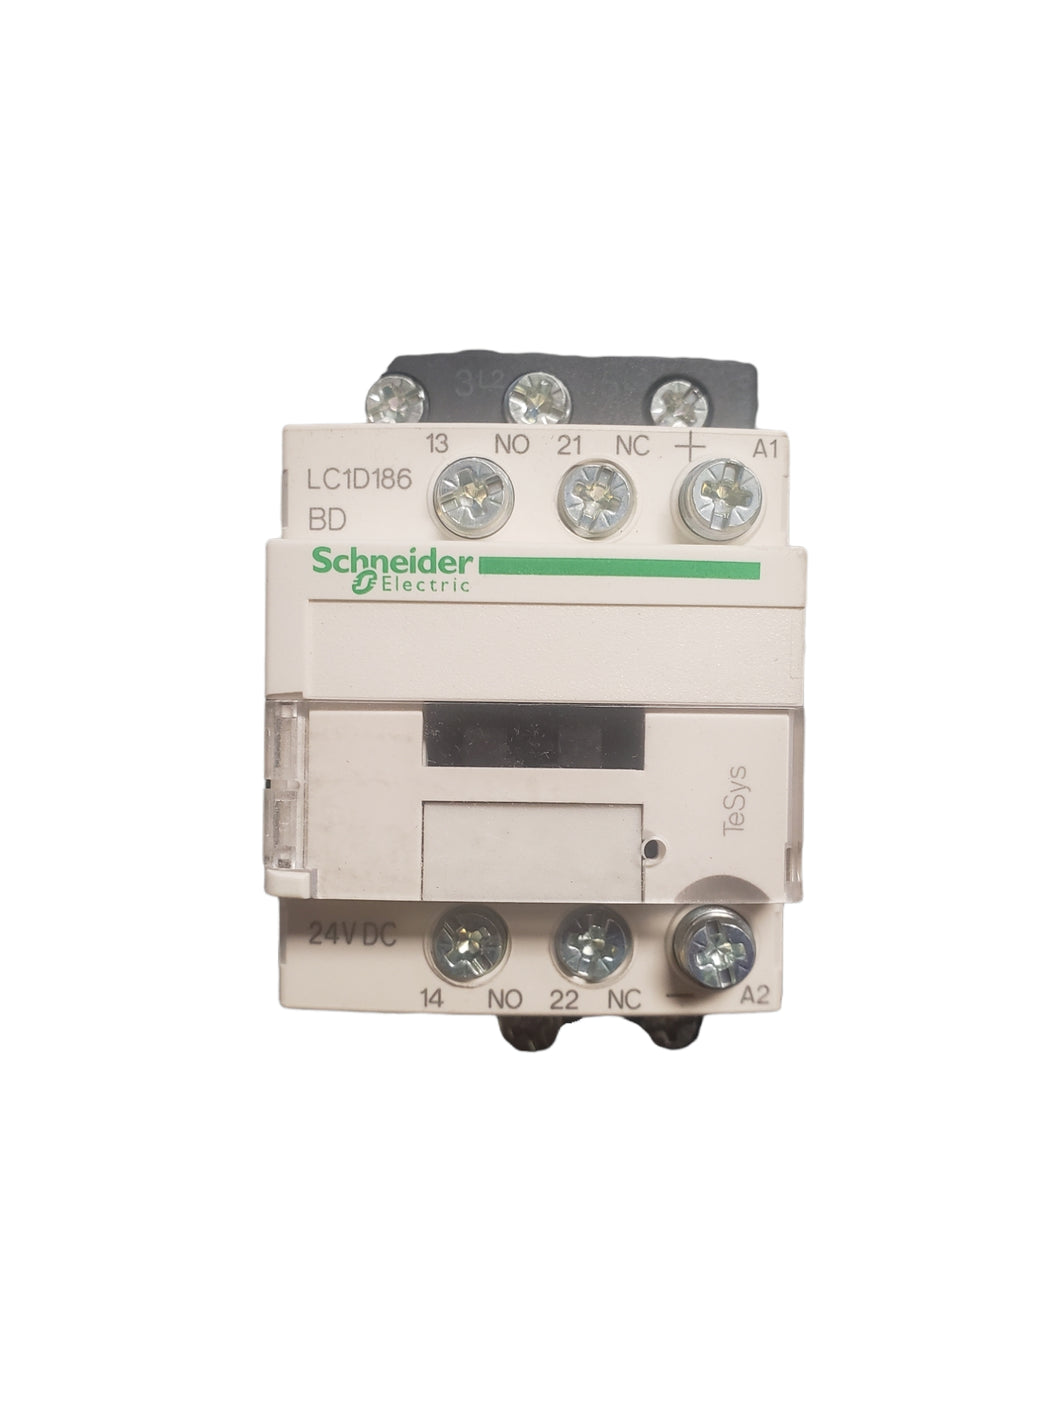 Schneider Electric LC1D186BD Contactor LC1, 3P, 32 A, 10 kW, 24 VDC, TeSys Deca Series - NEW IN BOX - FreemanLiquidators - [product_description]